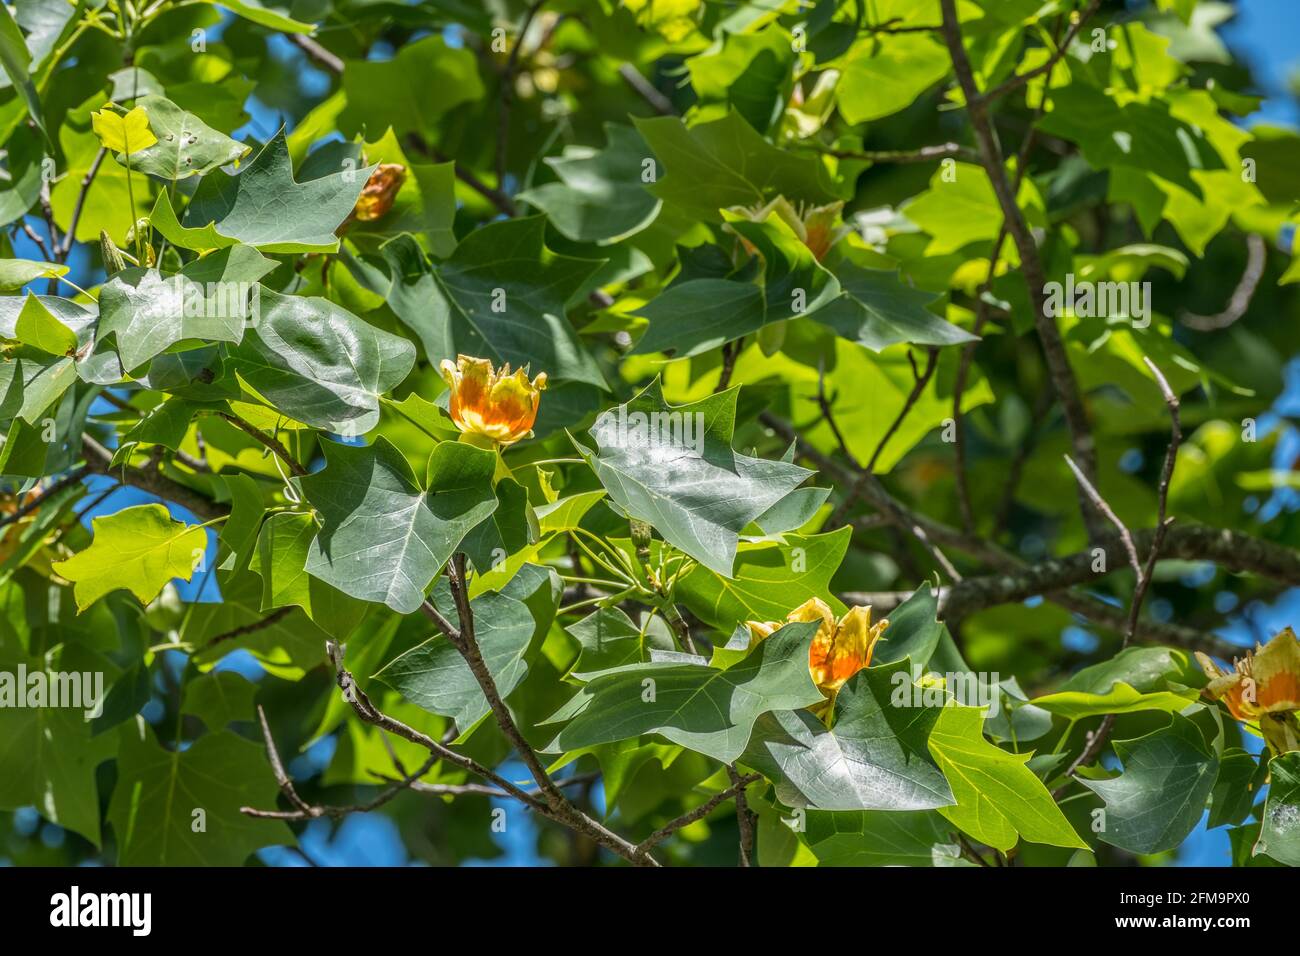 Looking high up at a tulip tree or poplar with fully opened yellow and orange flowers with tulip shape leaves on the branches on a sunny day in spring Stock Photo